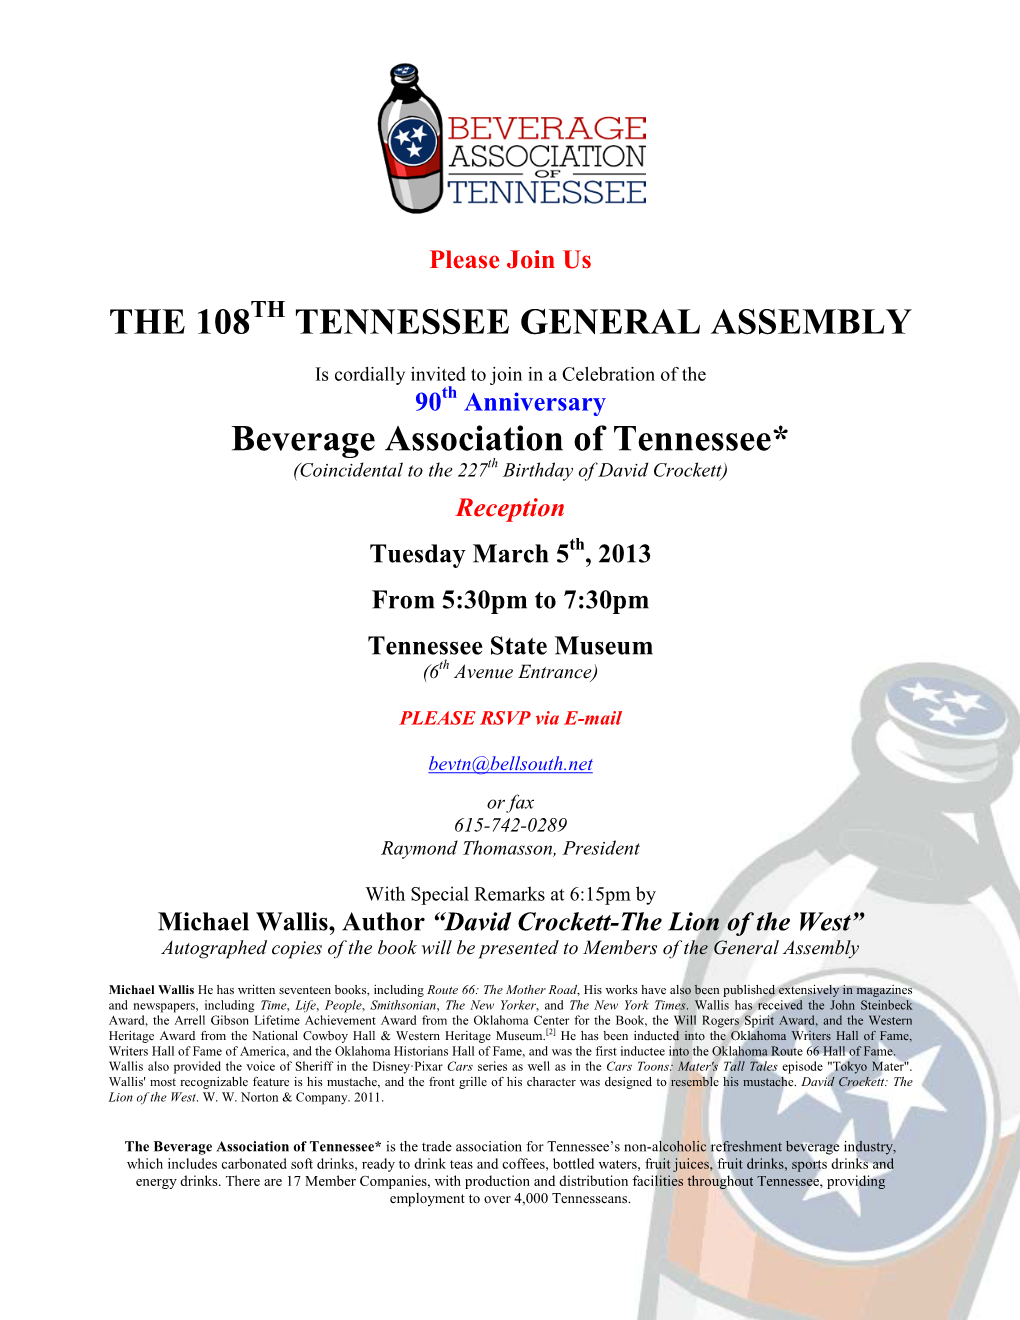 THE 108 TENNESSEE GENERAL ASSEMBLY Beverage